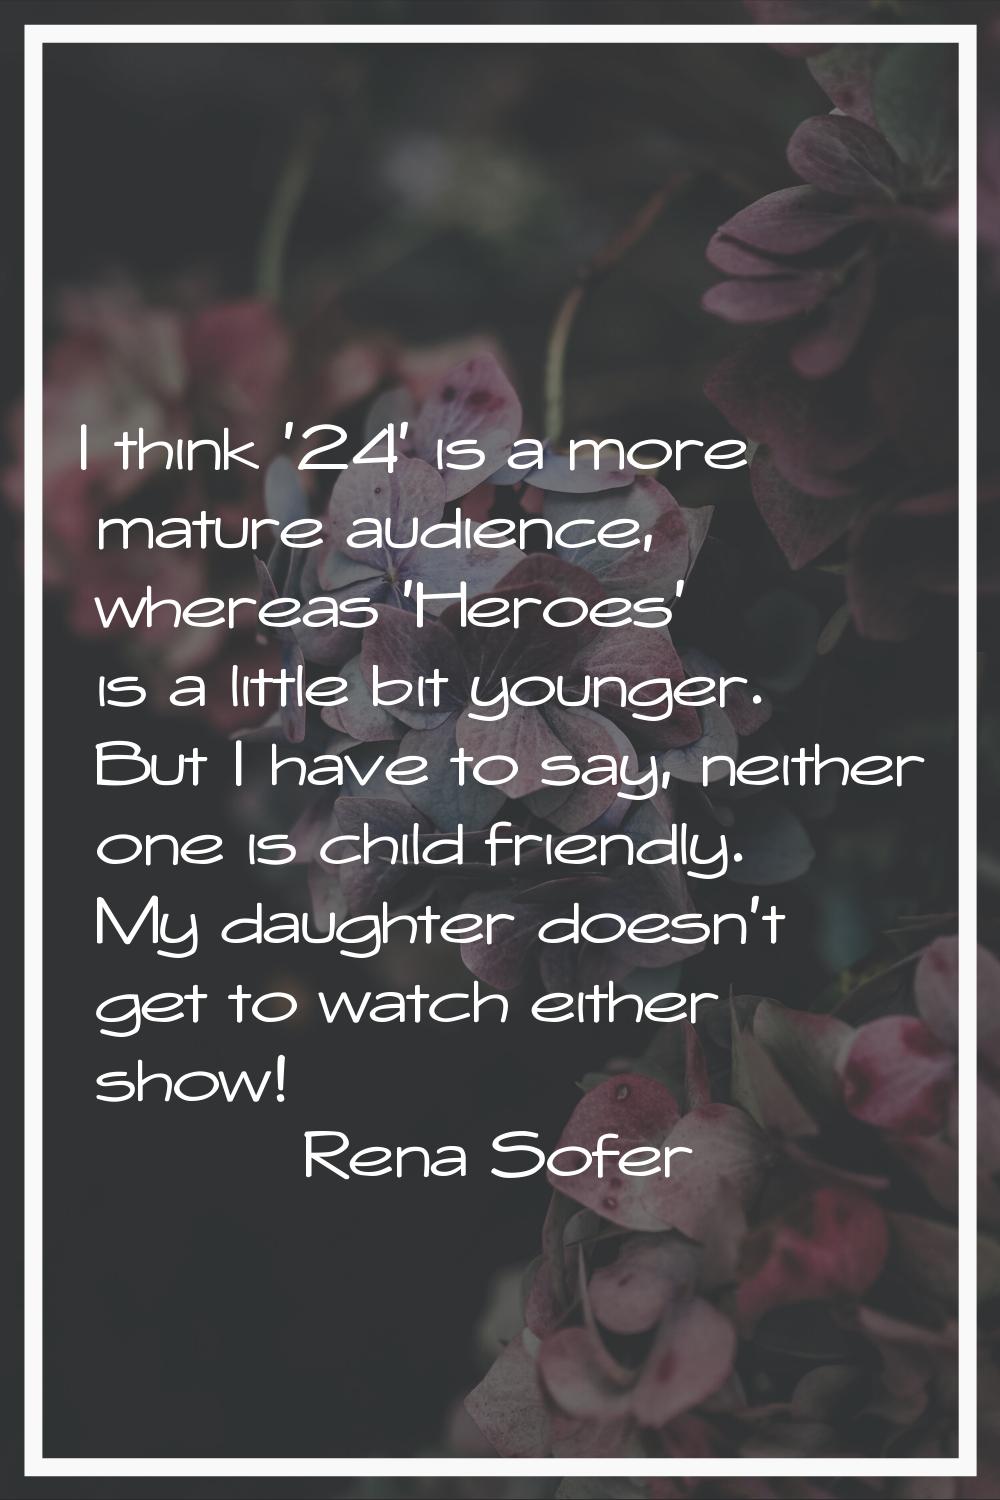 I think '24' is a more mature audience, whereas 'Heroes' is a little bit younger. But I have to say